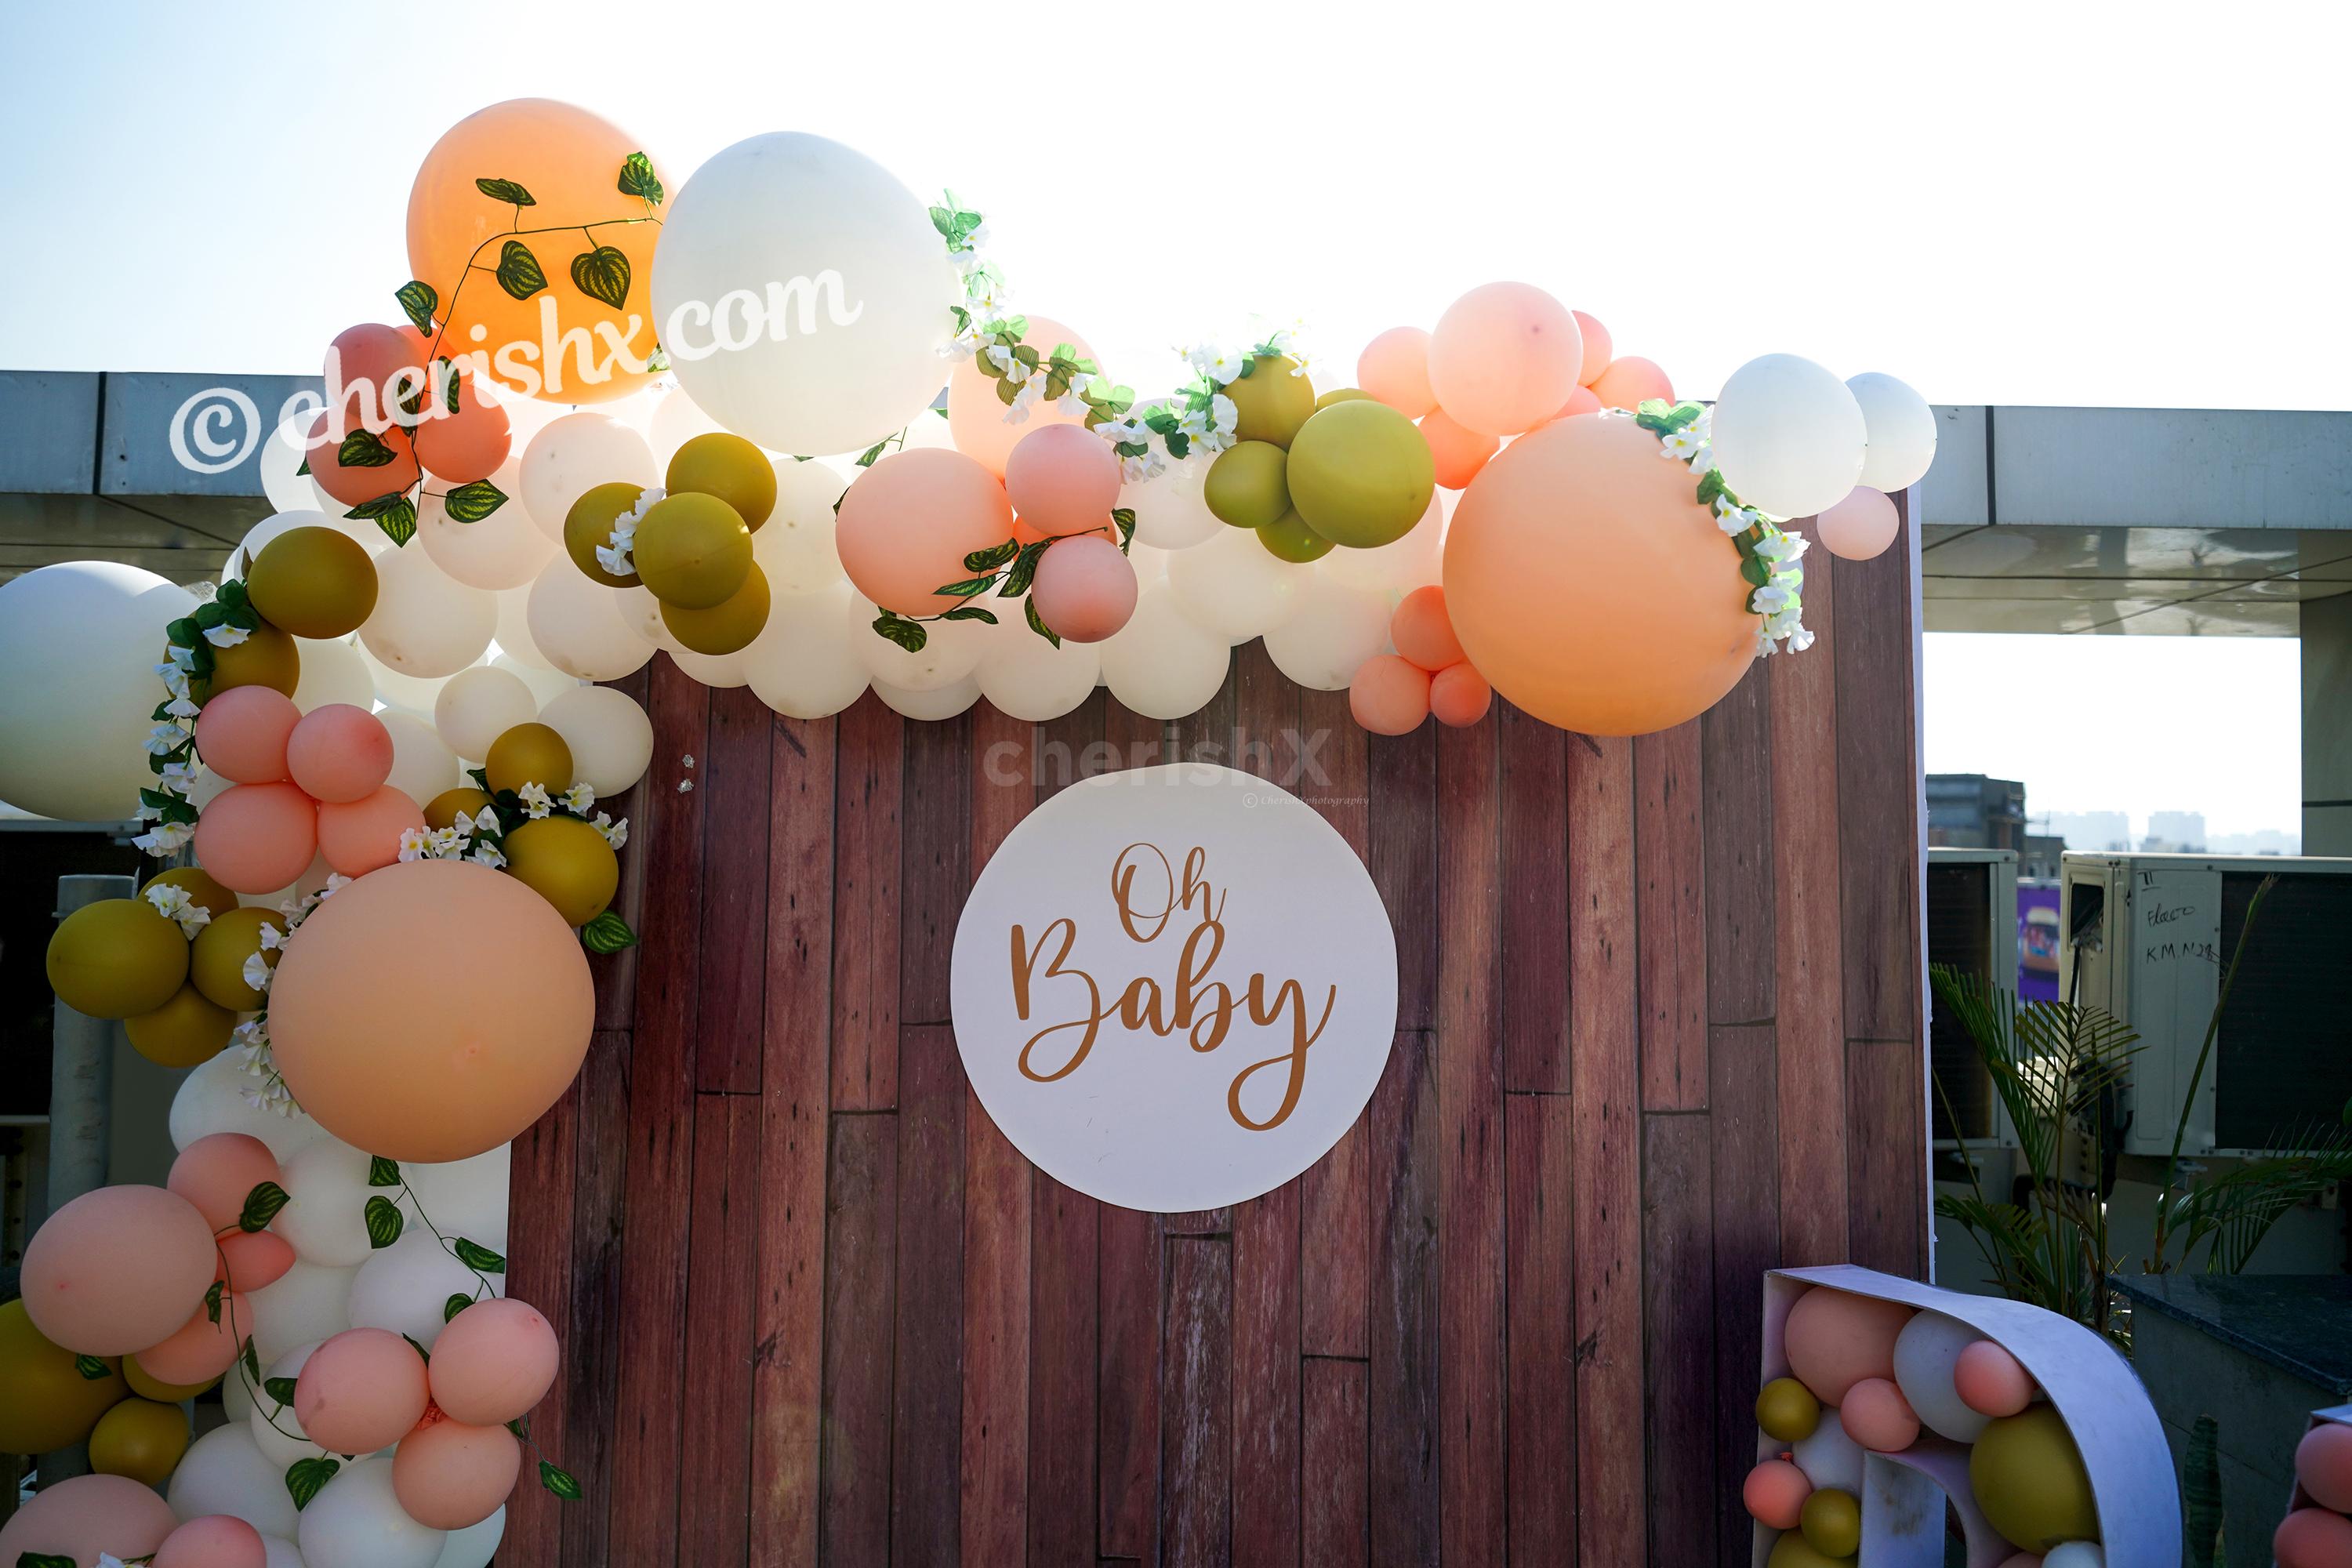 Have a charming baby shower with CherishX's Peach Colored Baby Shower Decor!